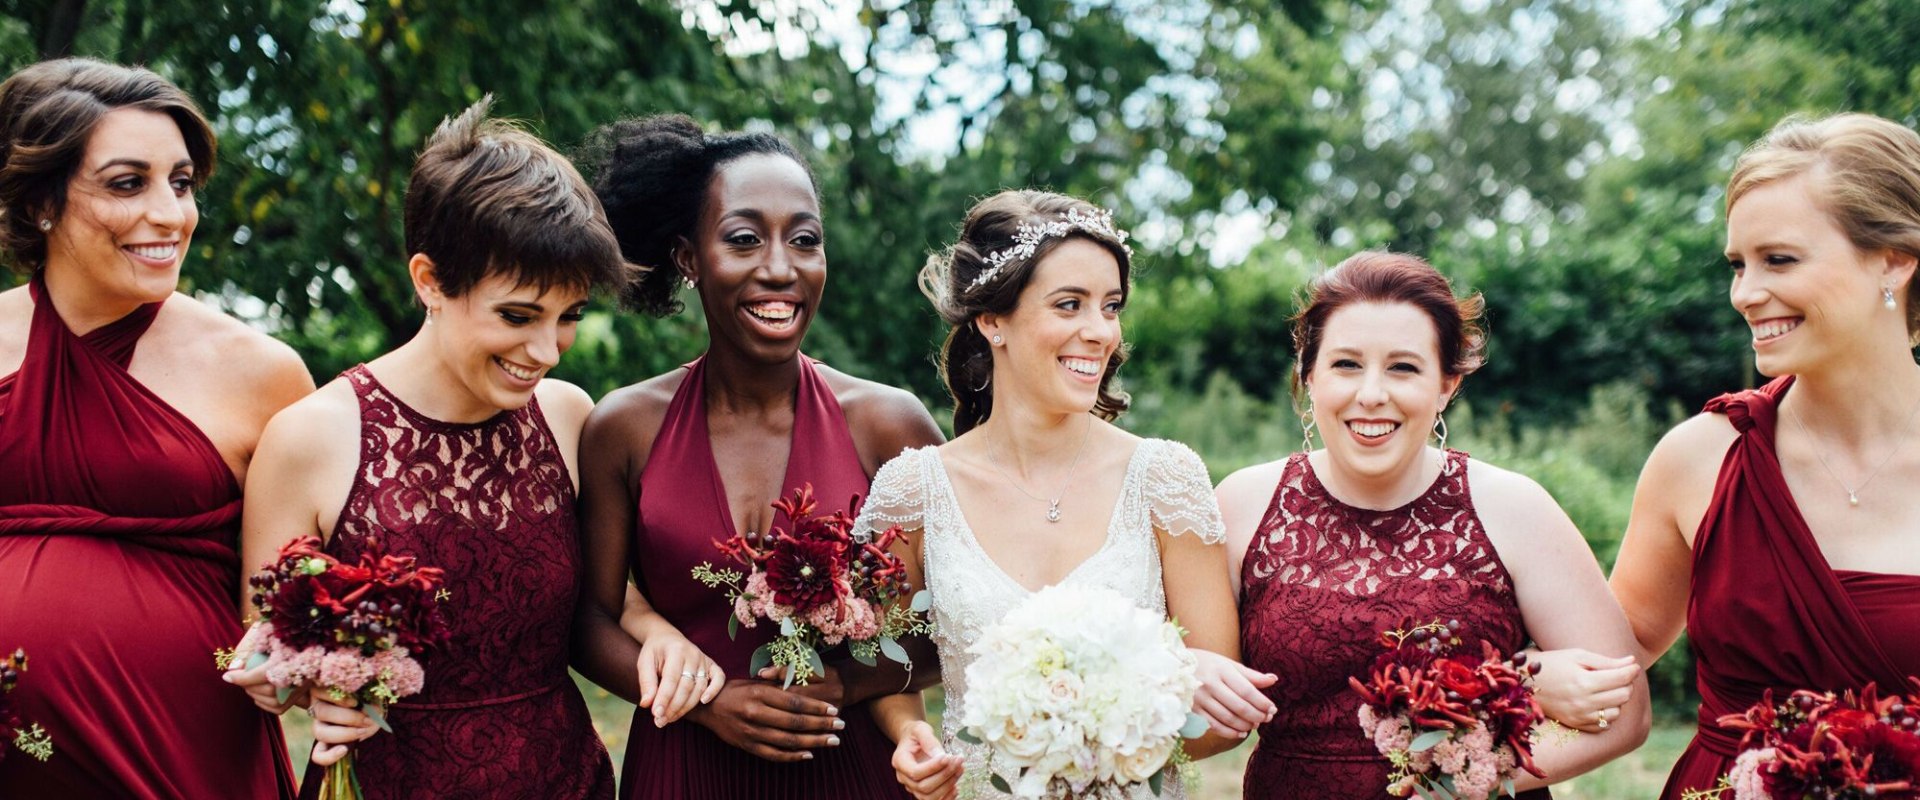 How Much Should Bridesmaids Pay for Their Dresses?